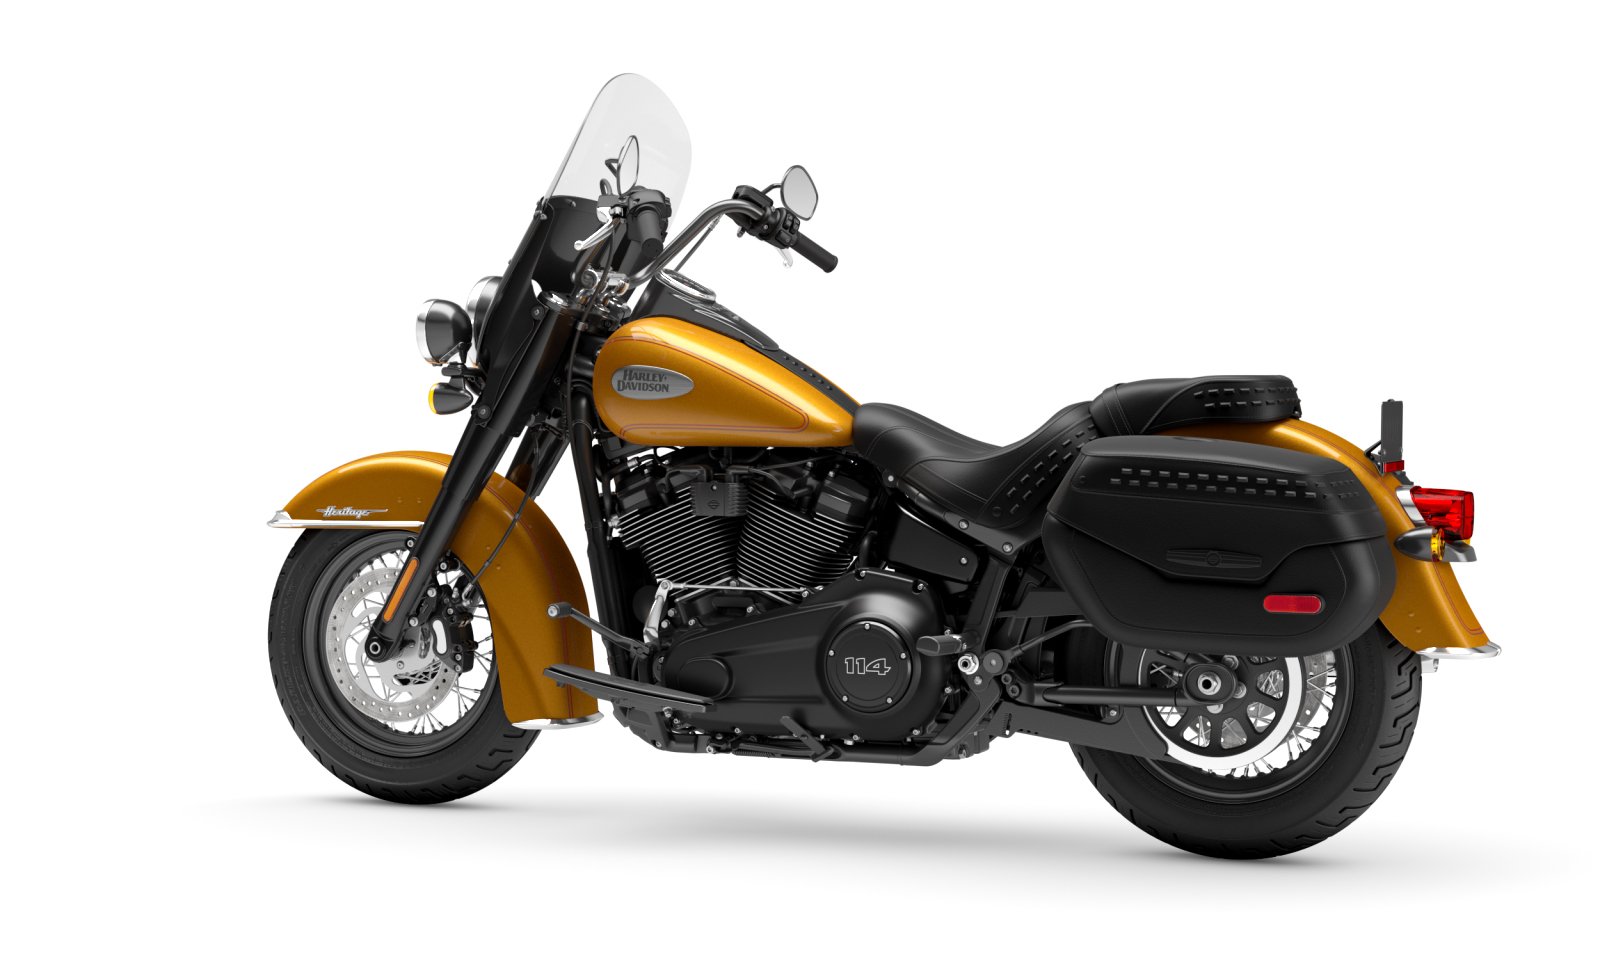 2023 Harley Davidson Heritage Classic [Specs, Features, Photos]